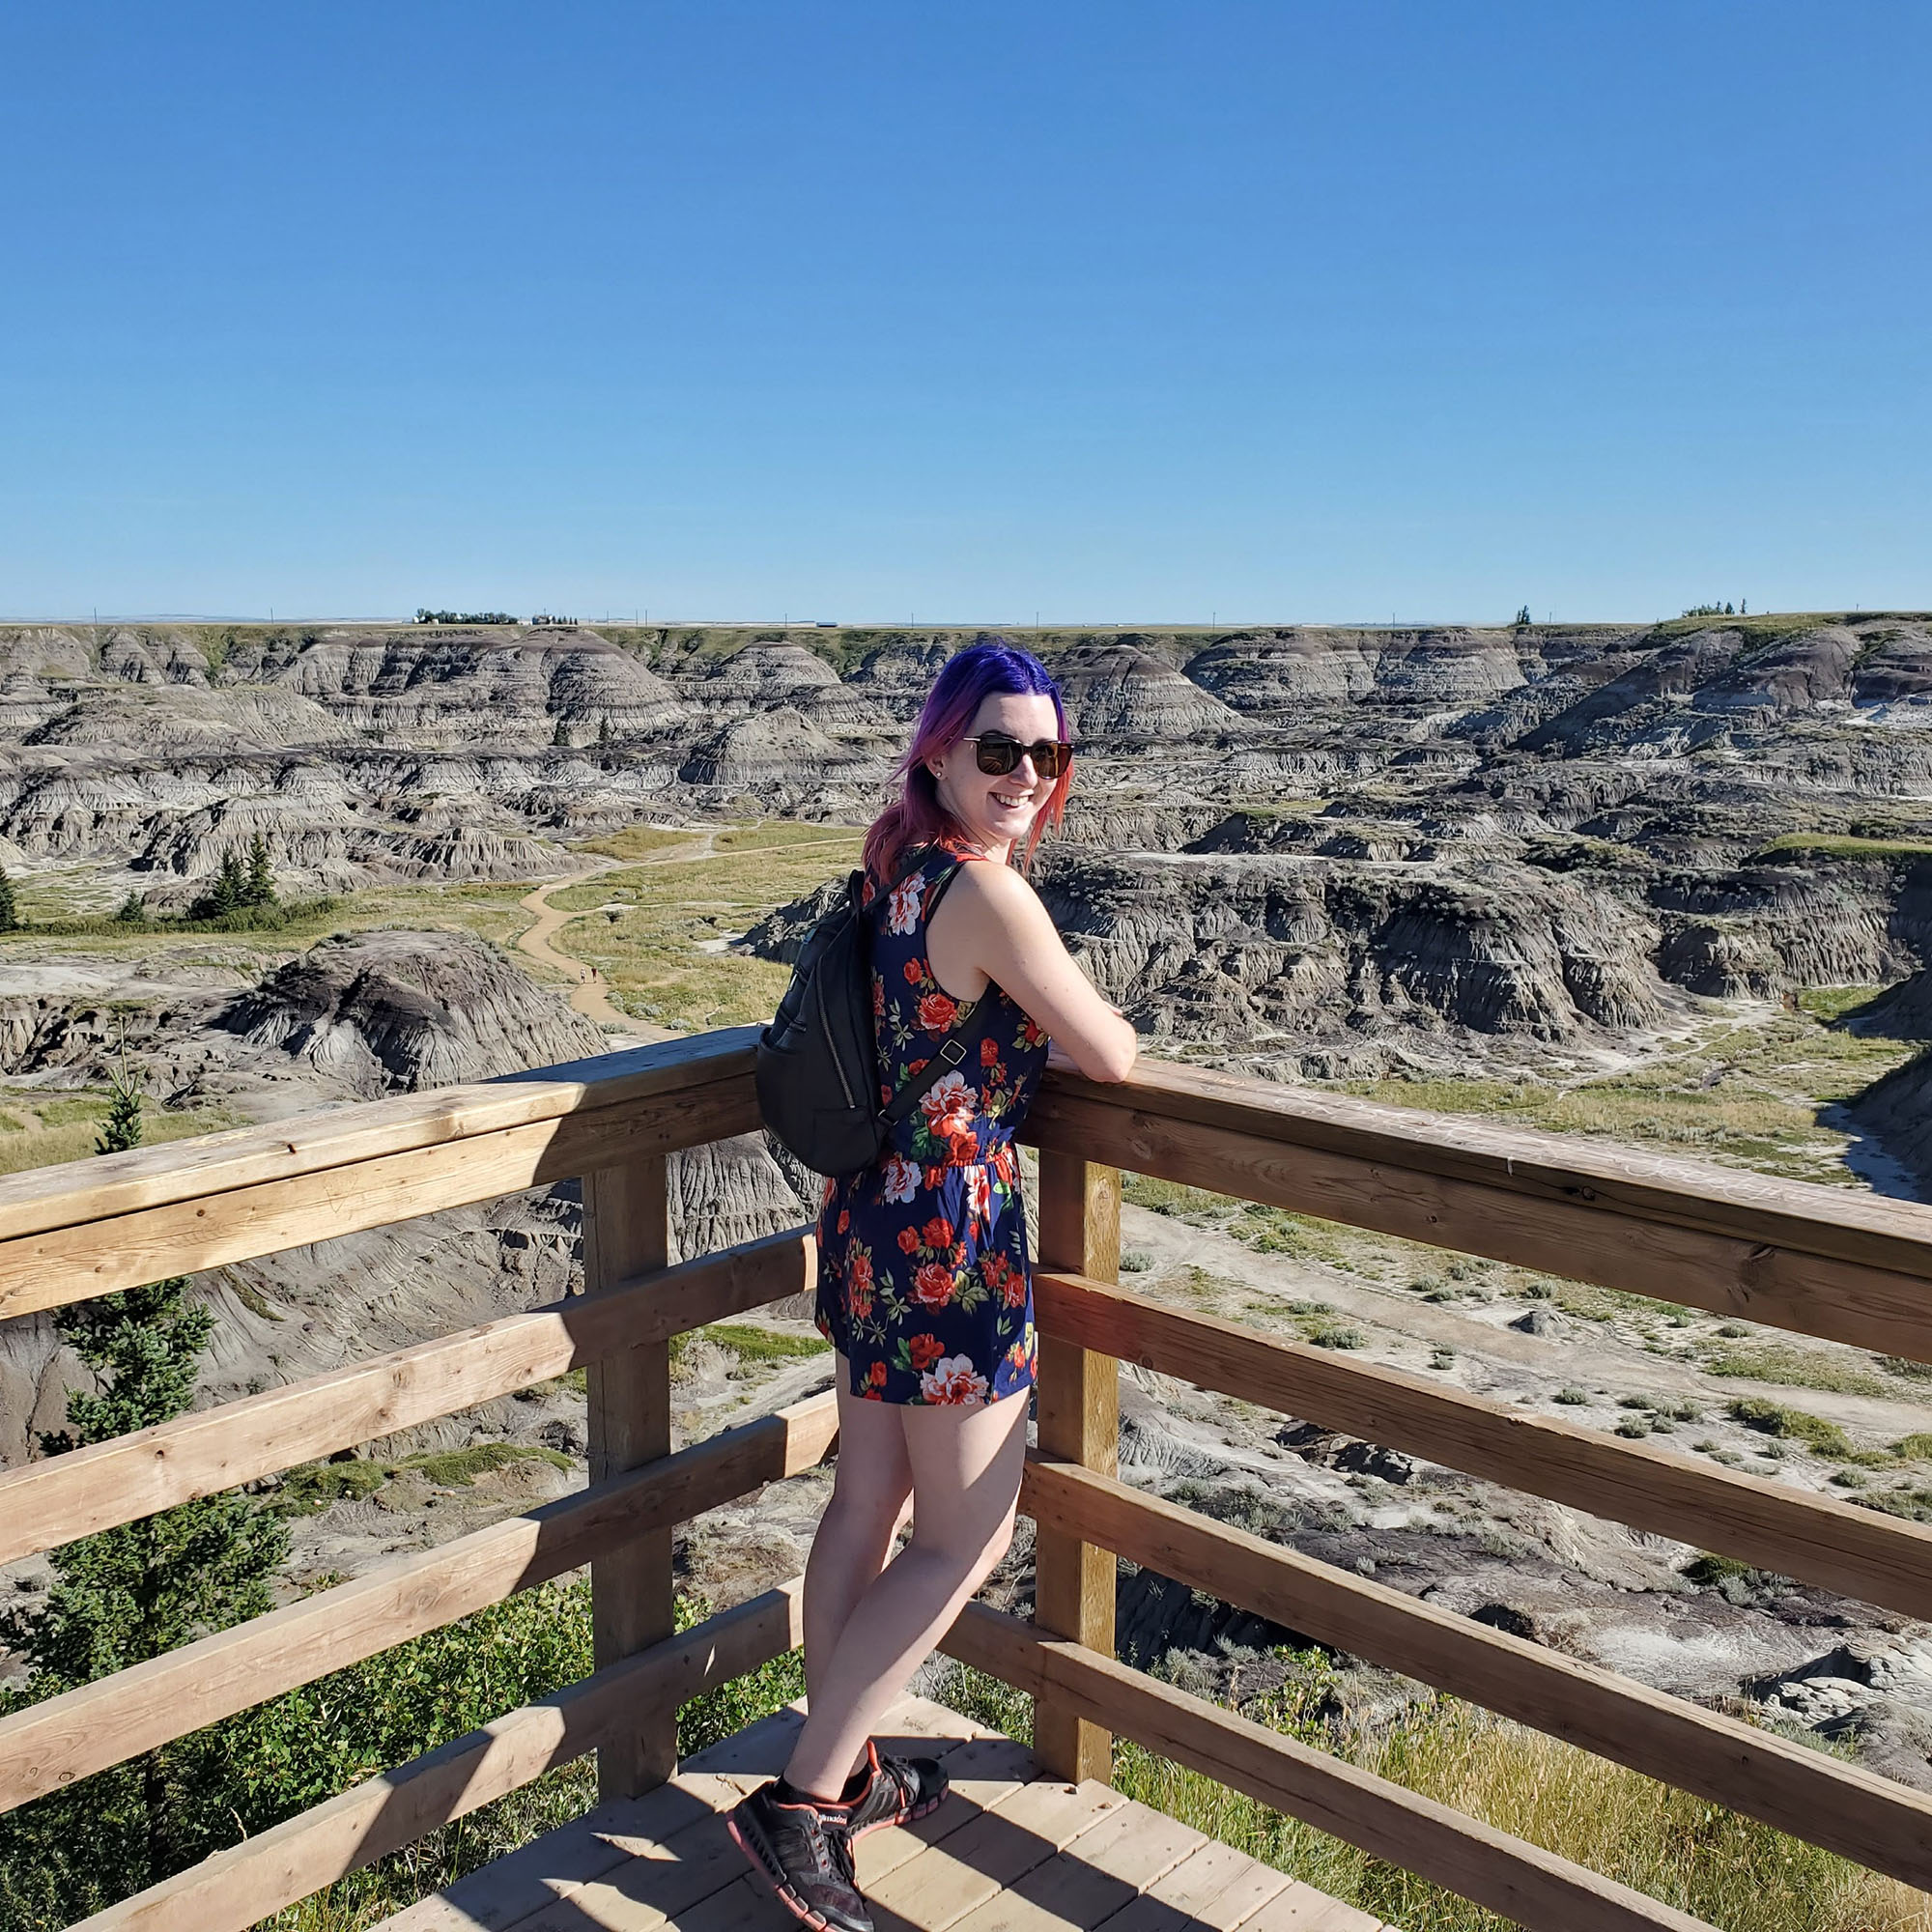 Brittany poses in front of Drumheller's badlands